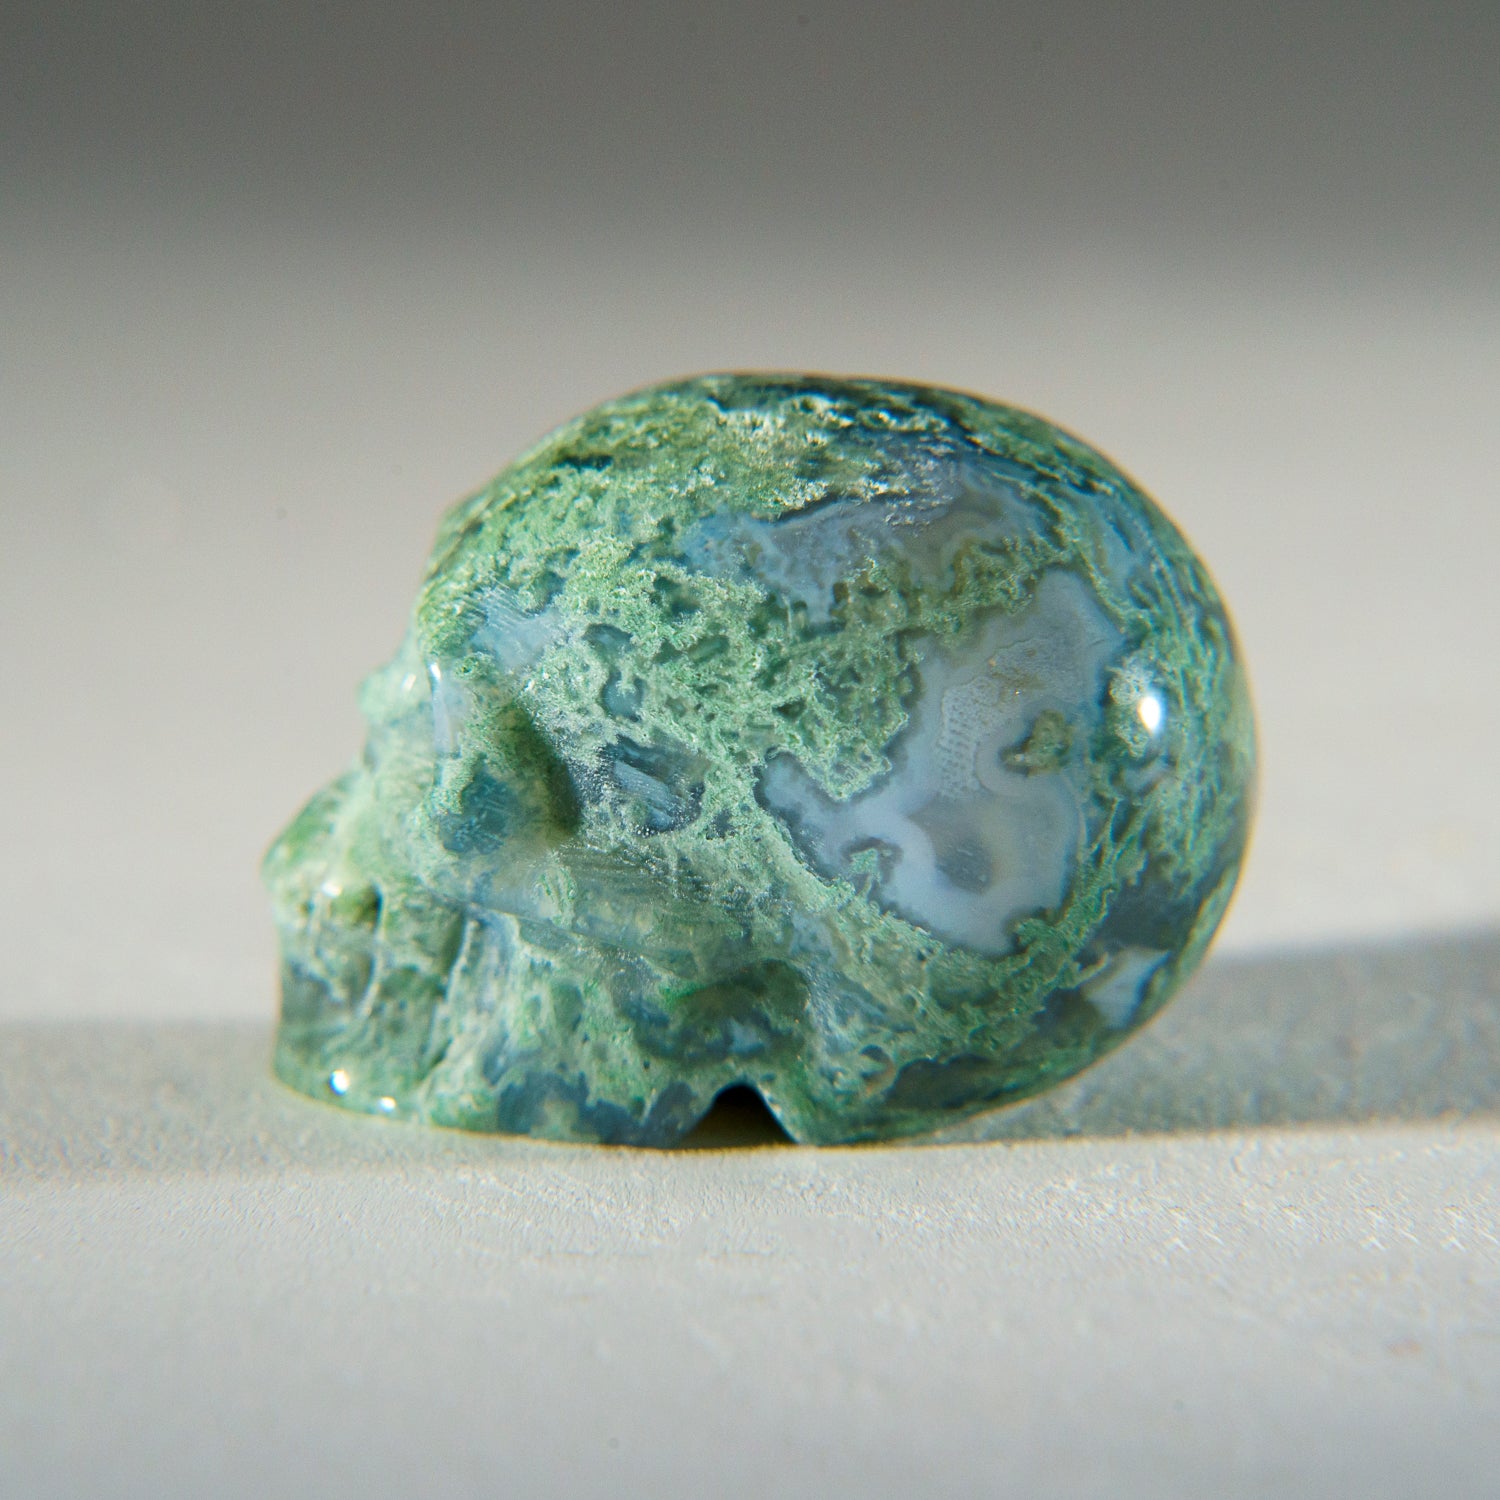 Polished Green Moss Agate Skull Carving (25 grams)